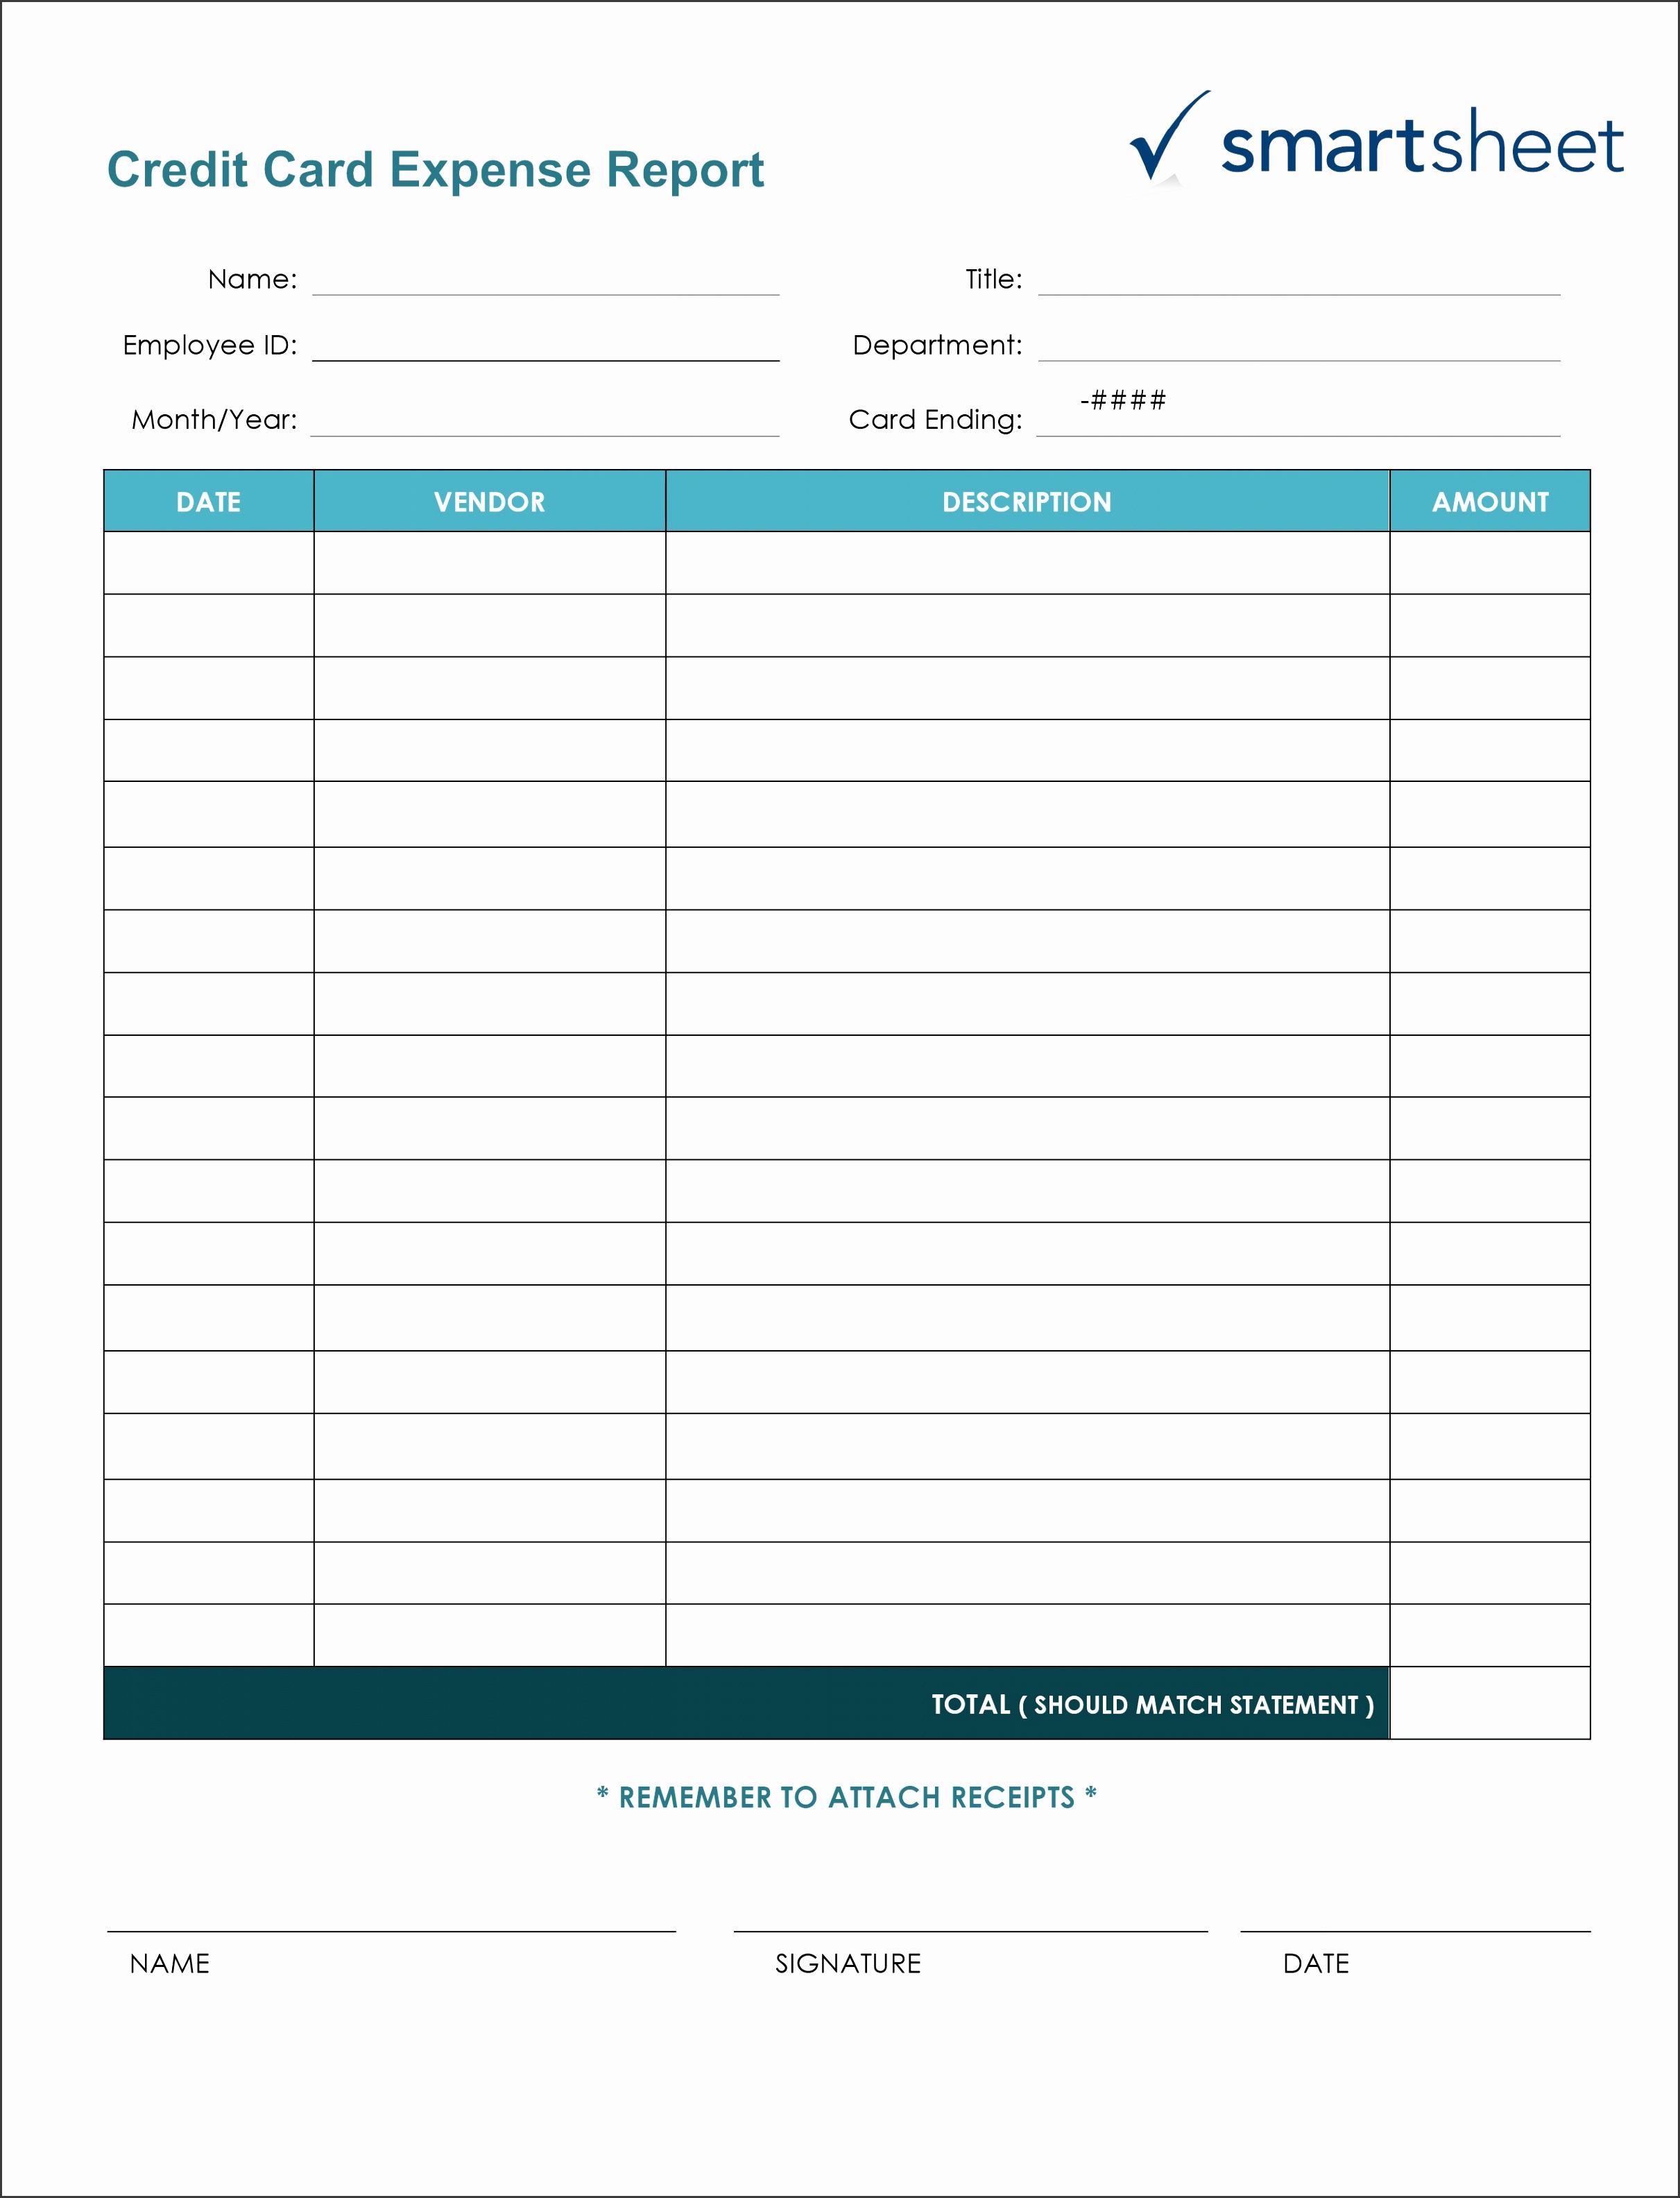 Certificate Insurance Template Free Awesome Free Expense Report Templates Smartsheet